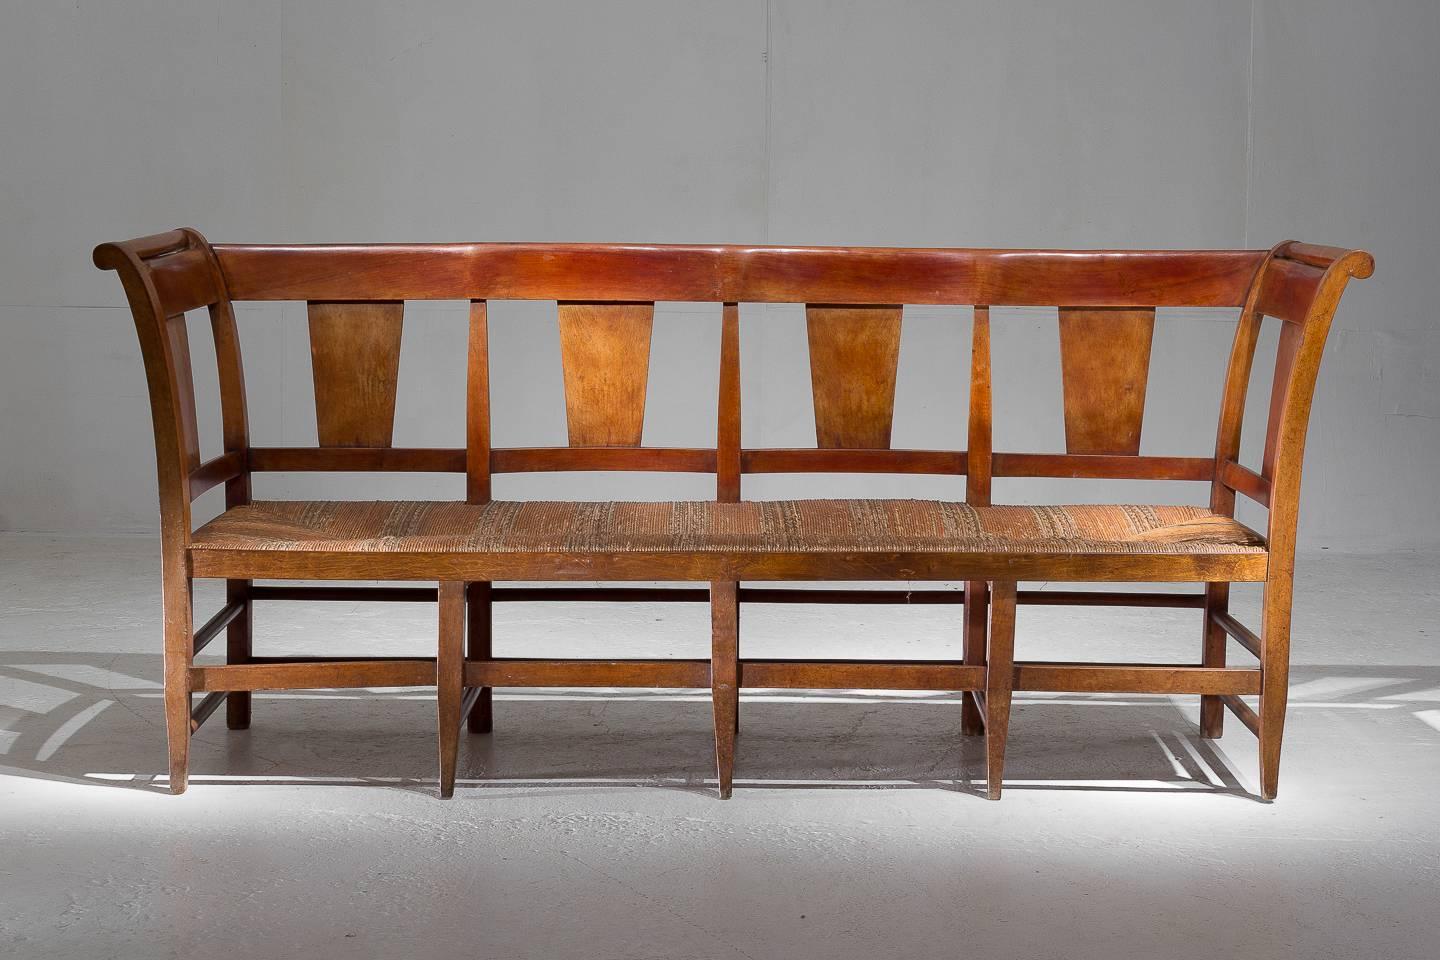 19th century Provençal fruitwood bench with rush seat.

Seat height: 53 cm.